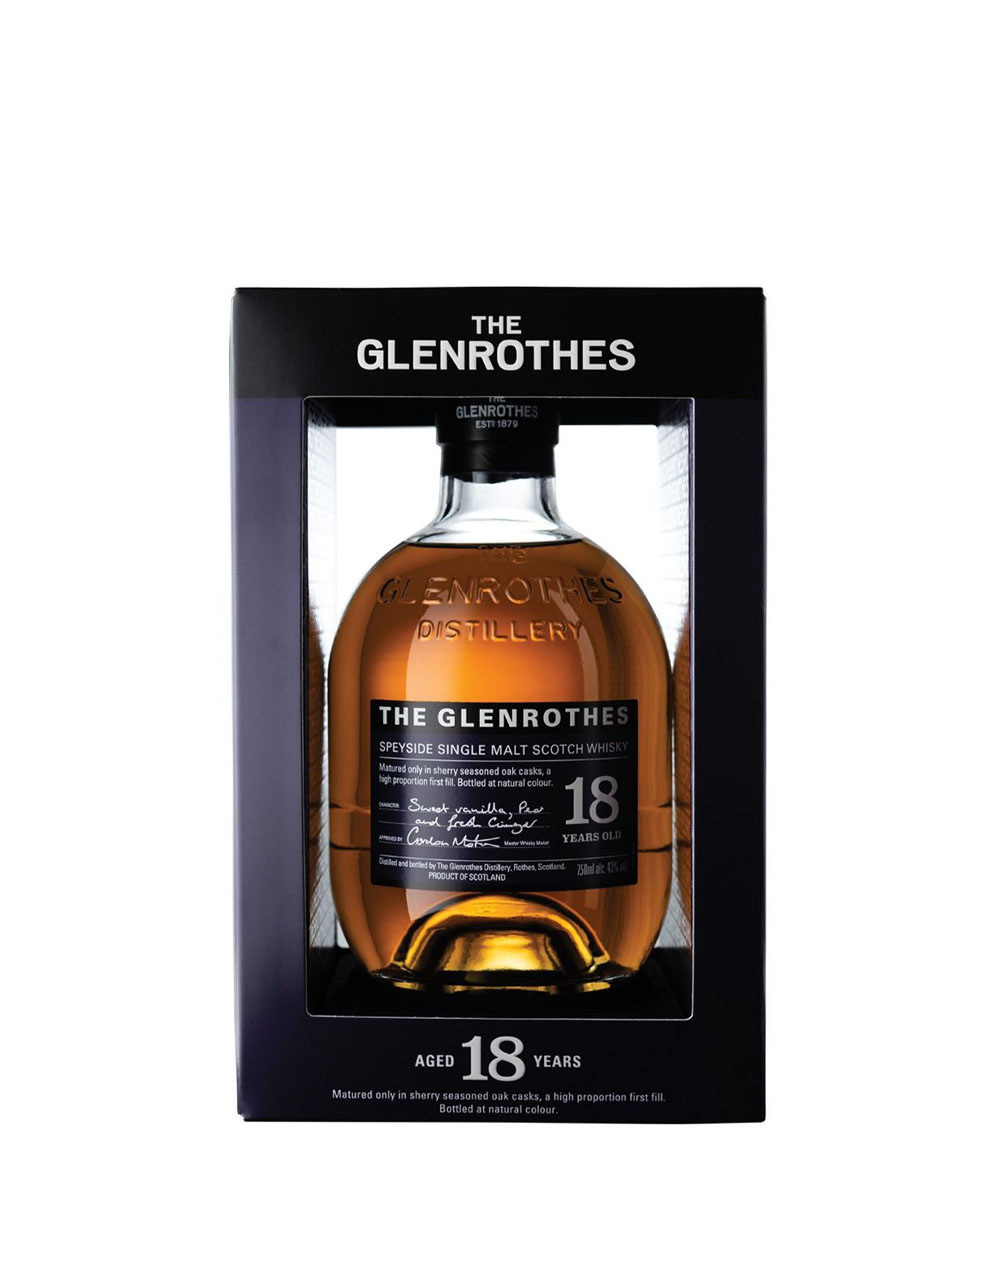 The Glenrothes 18 Year Old Scotch Whisky